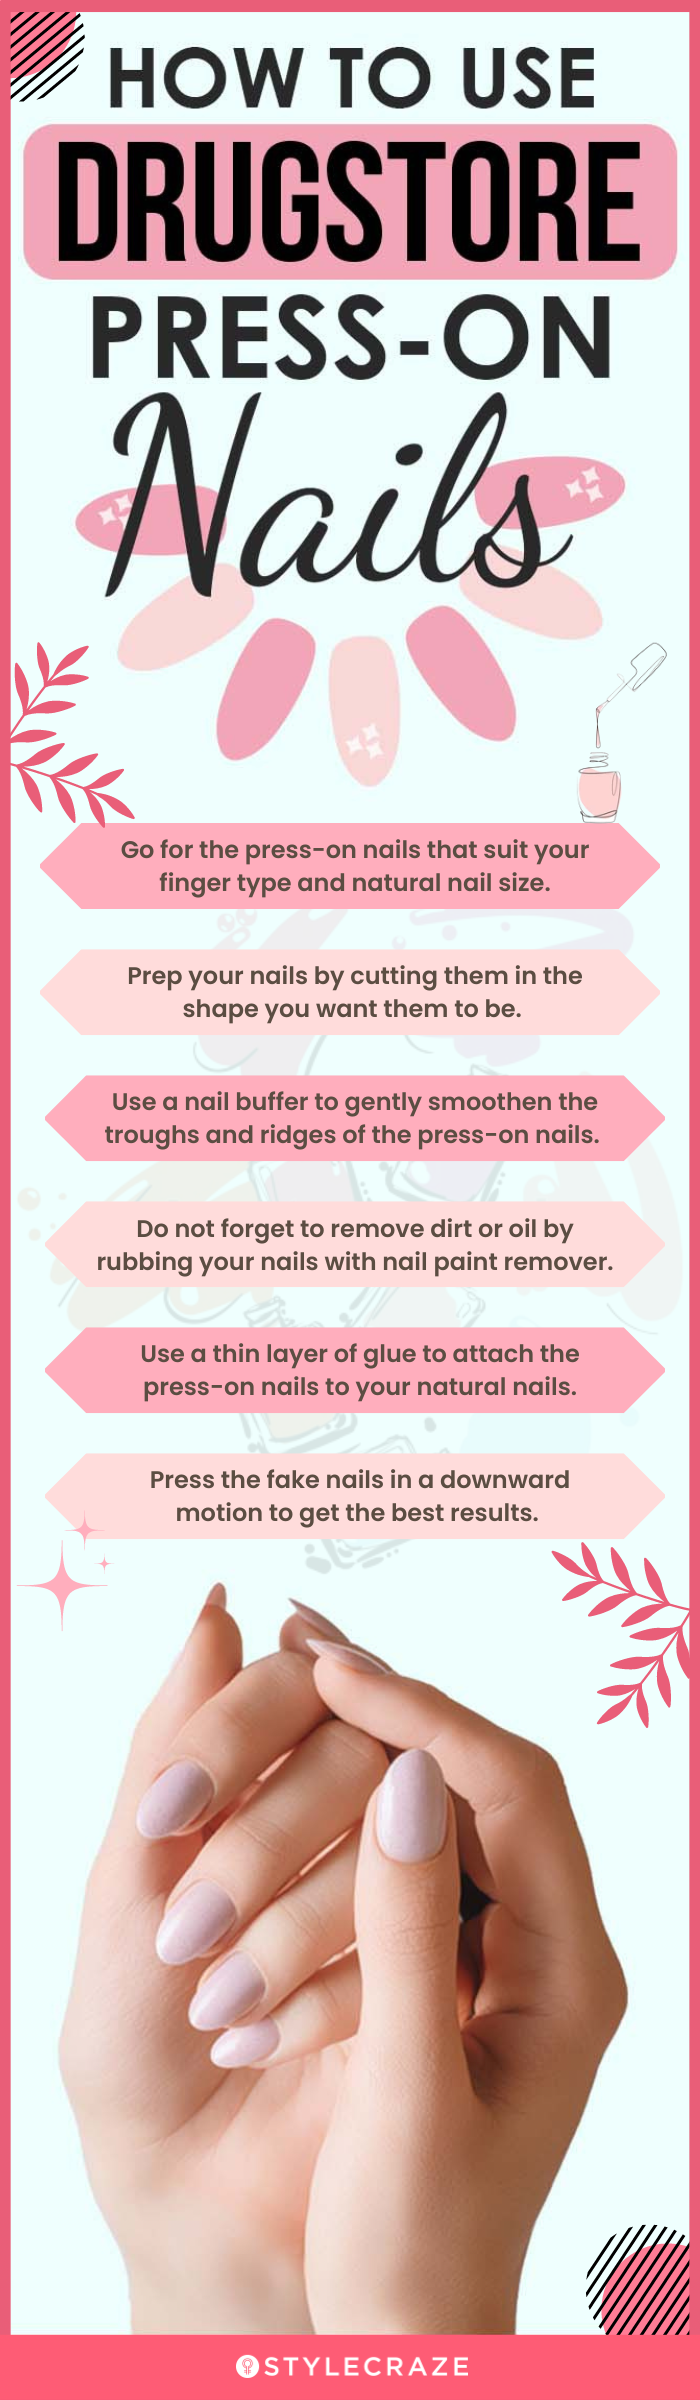 How To Use Drugstore Press-On Nails (infographic)